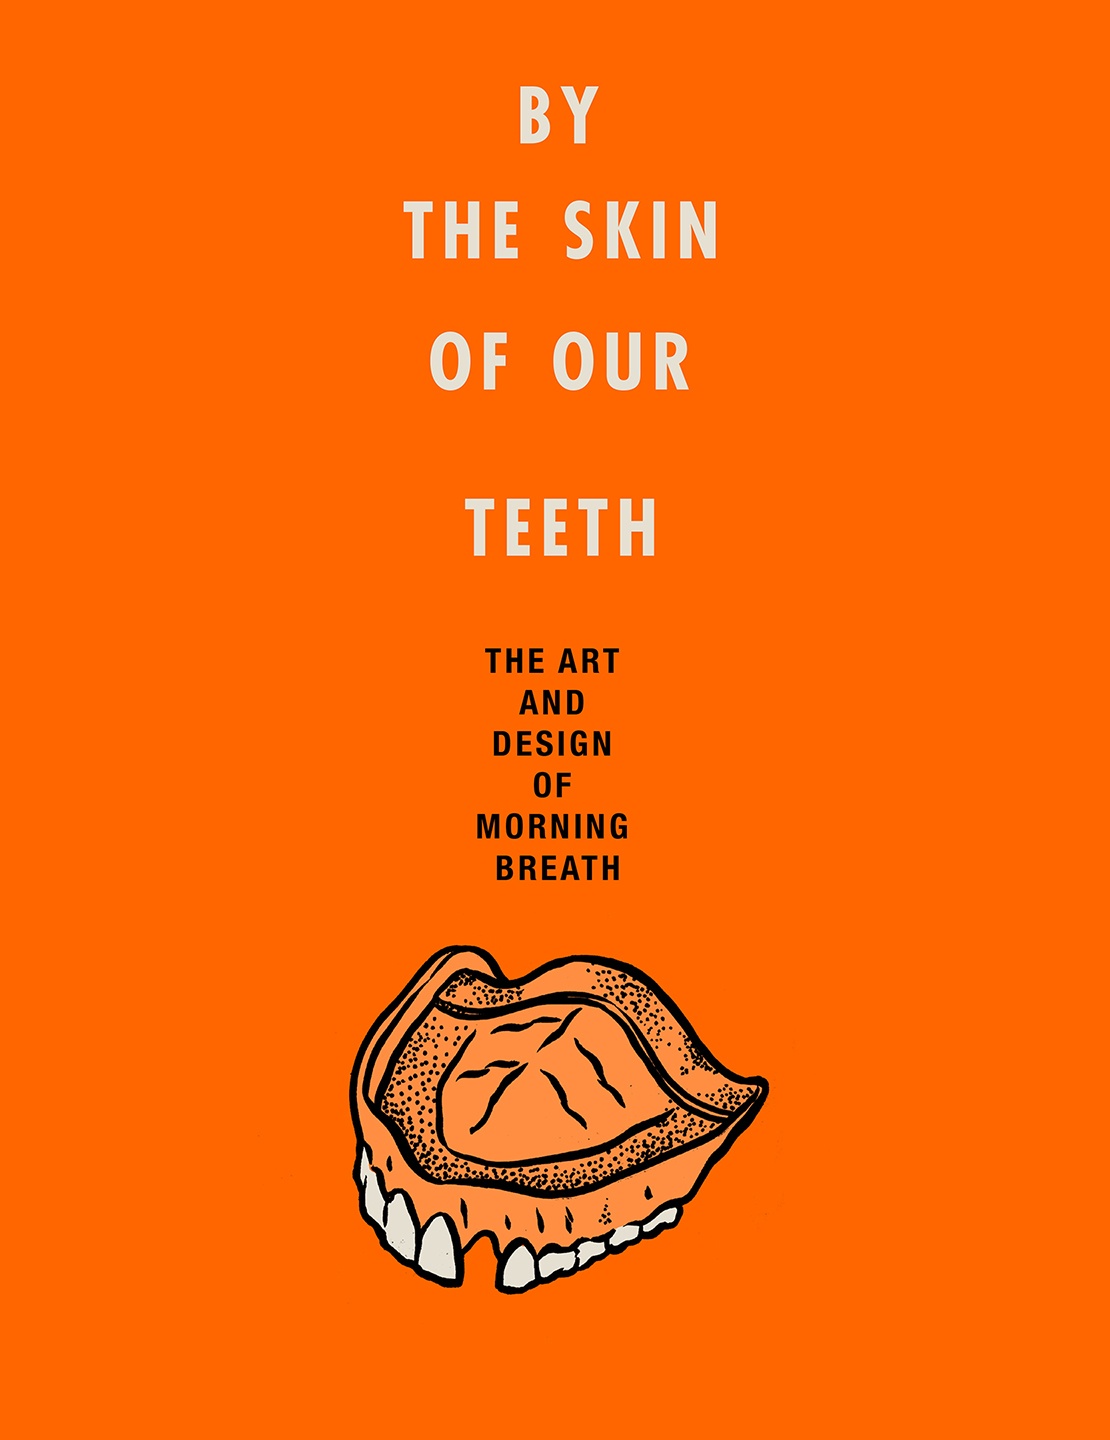 Book Launch: By the Skin of Our Teeth: The Art and Design of Morning Breath by Jason Noto & Doug Cunningham — in conversation w/ Julian Alexander